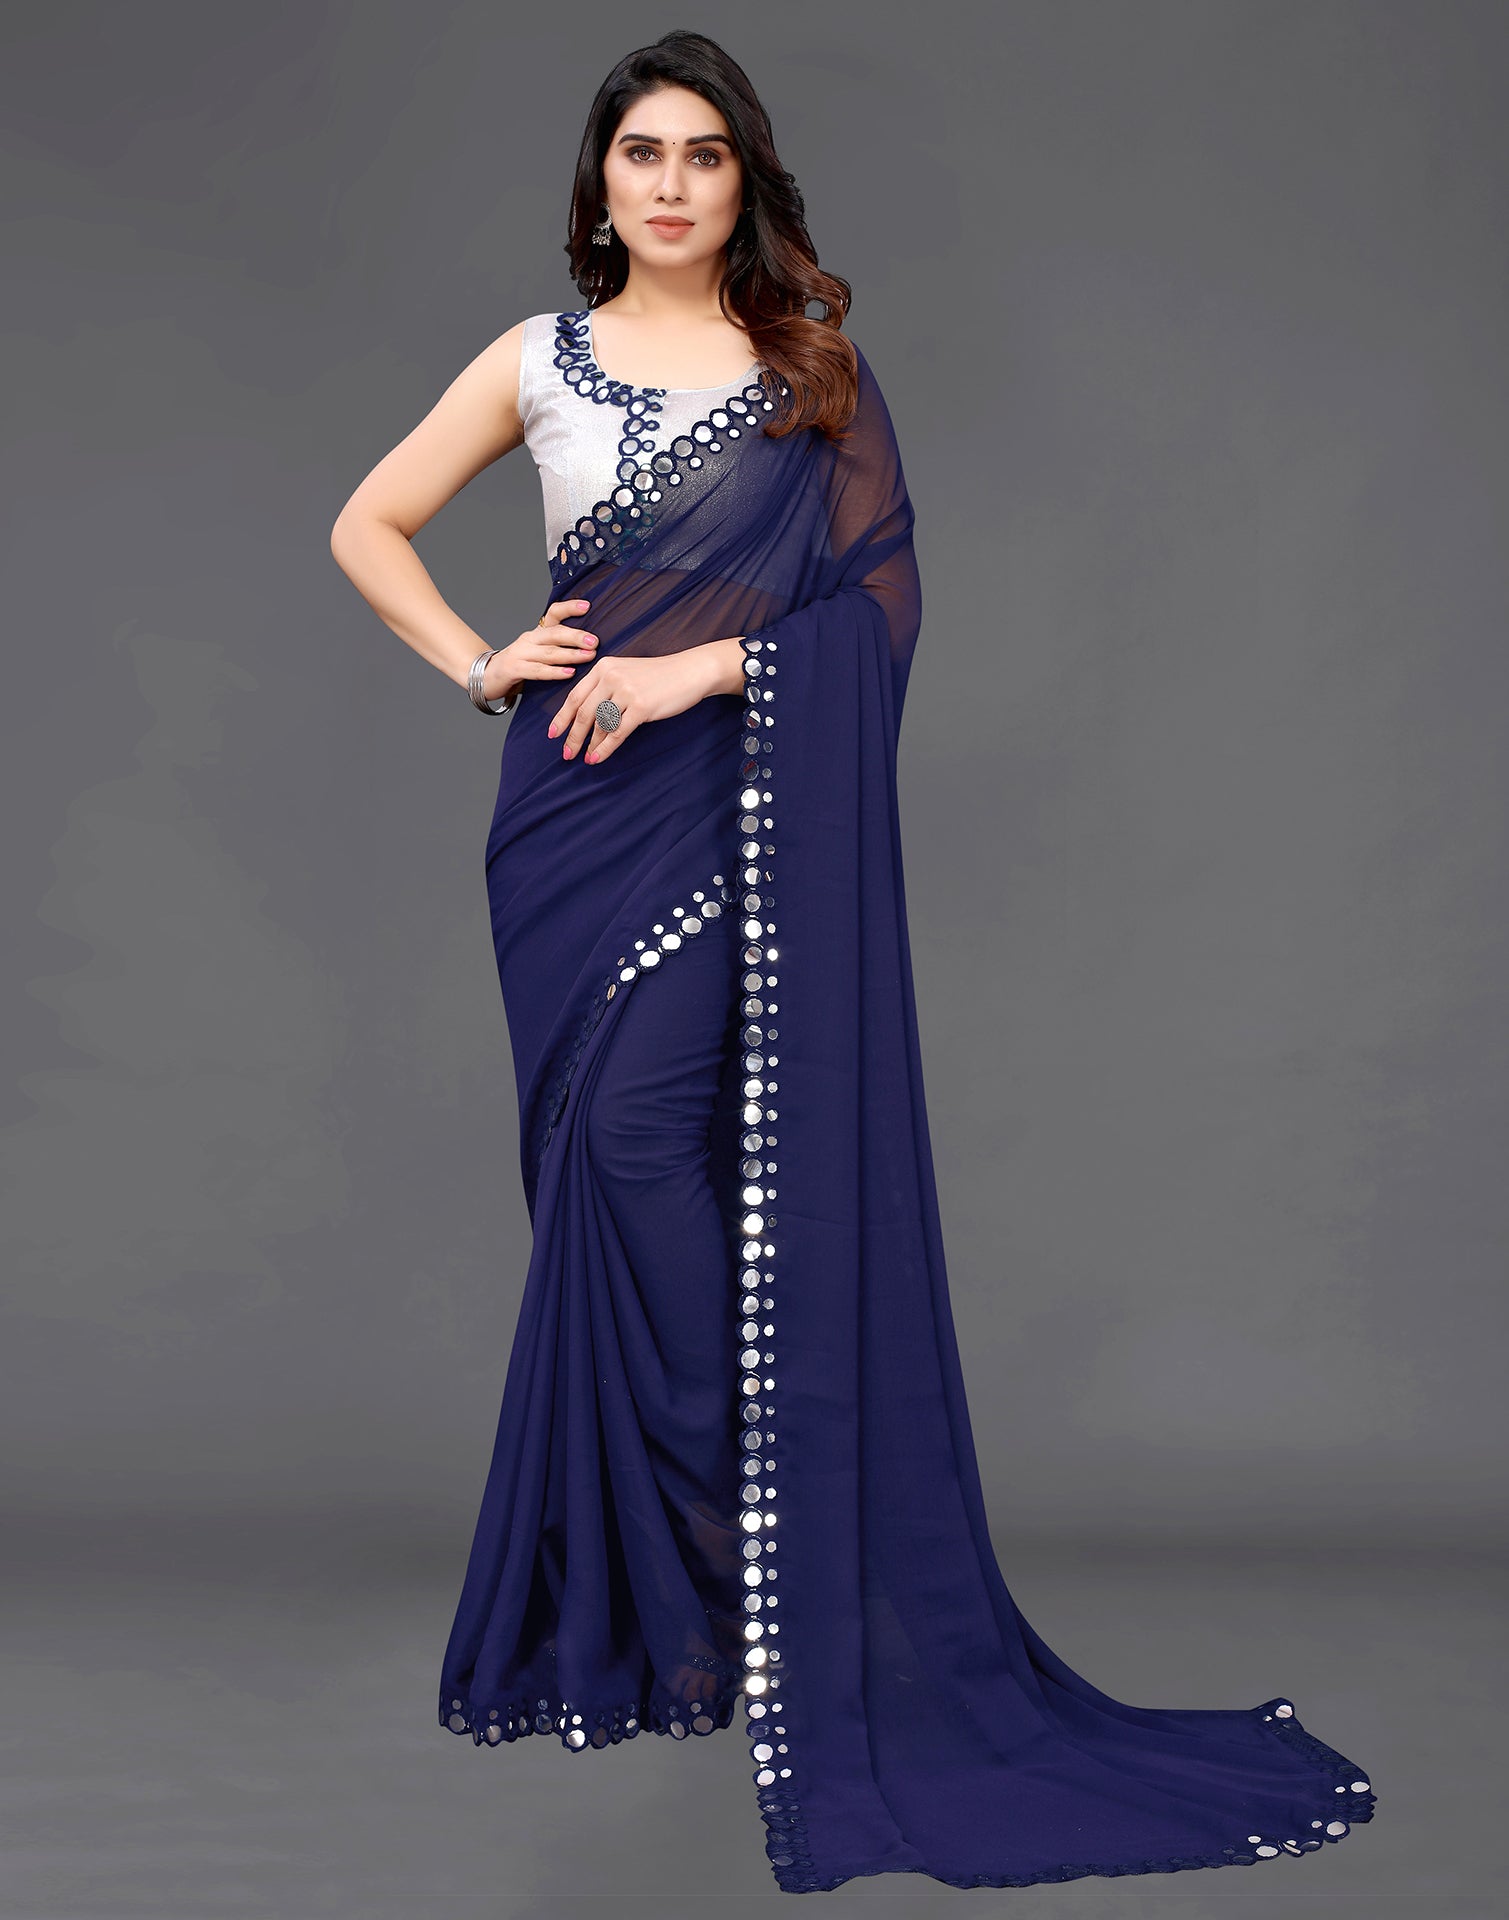 Designer Trending Mirror Work Saree For Party And Celebrations Look, Size:  Free at Rs 1799/piece in Bengaluru